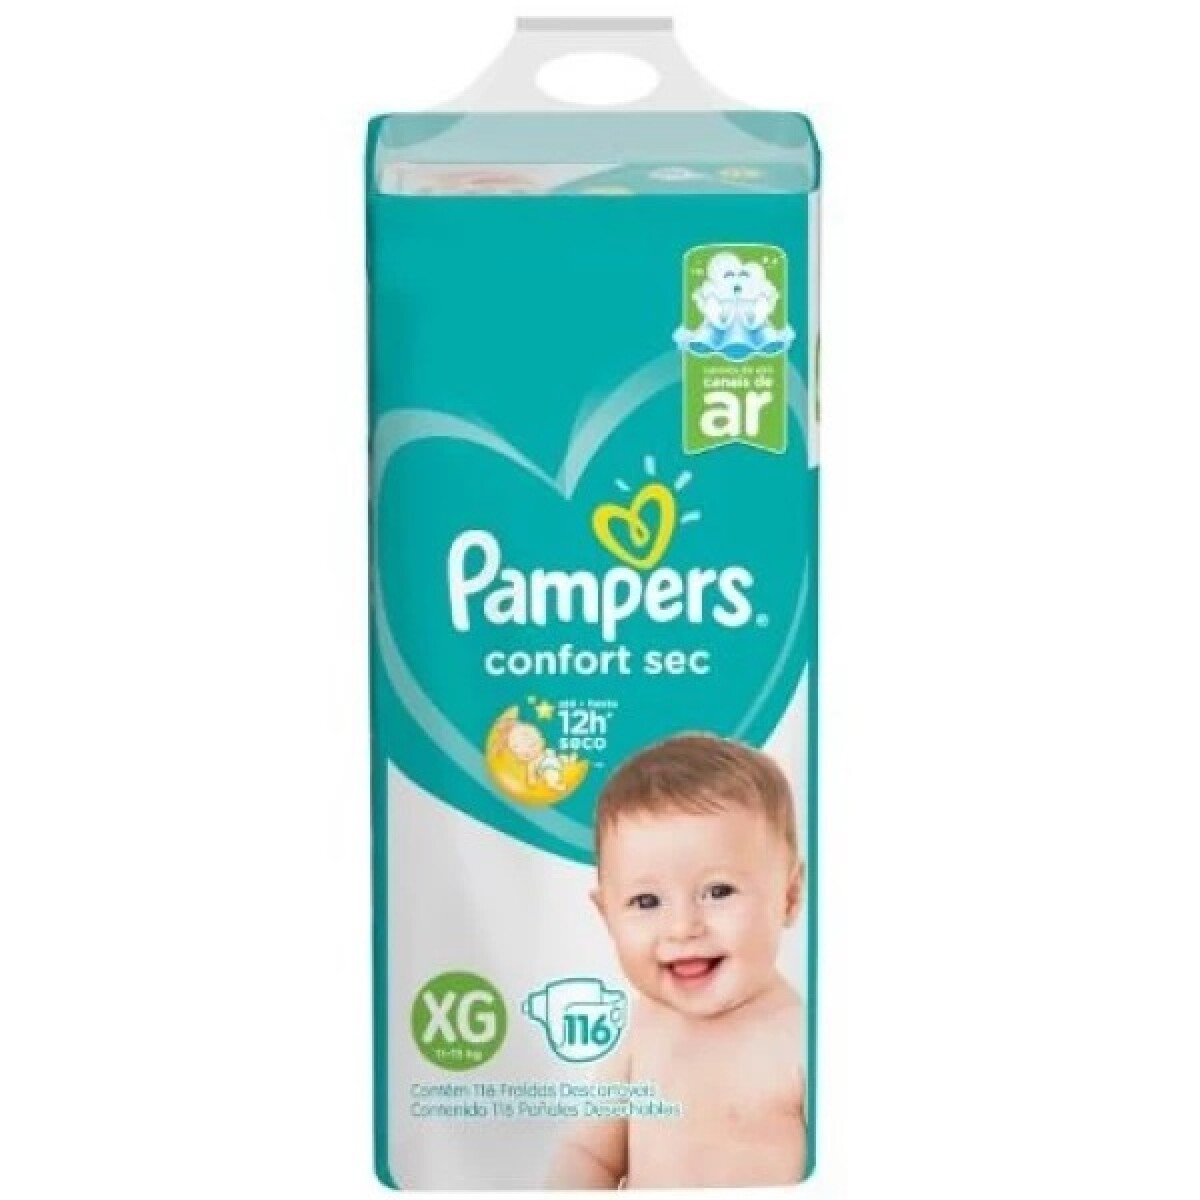 Pañales Pampers Confort Sec Talle Xg 116 Uds. 